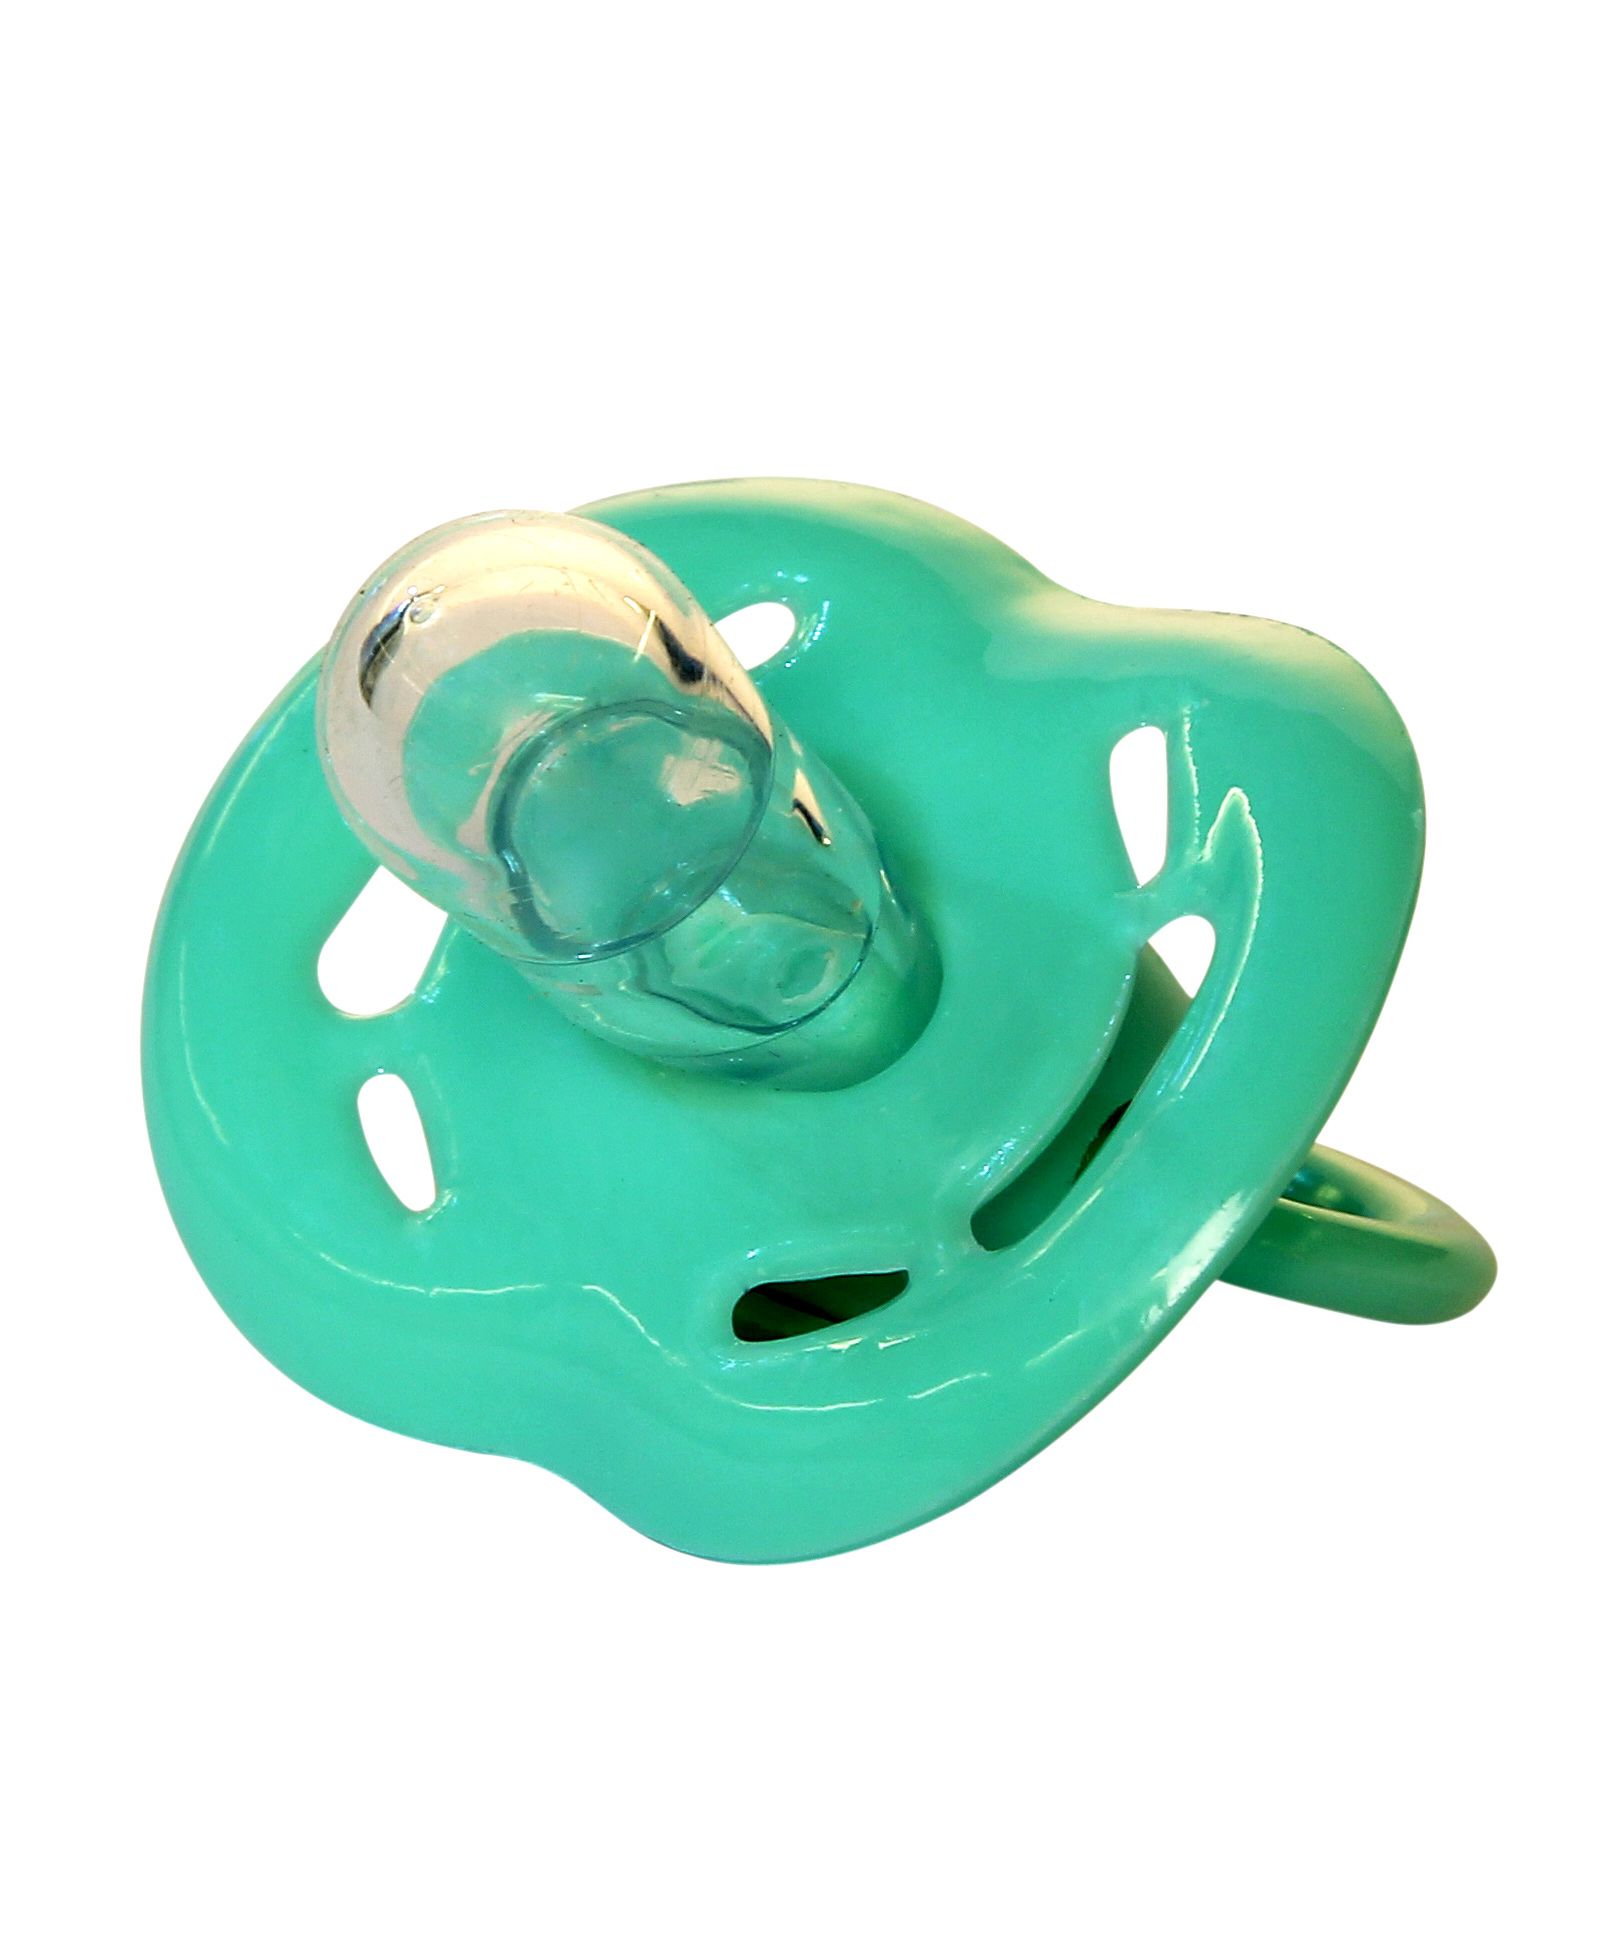 Small Wonder Soother With Liquid Silicone Bulb - Green Online India, Buy  Teethers & Soothers for (0-9 Months) at FirstCry.com - 685032